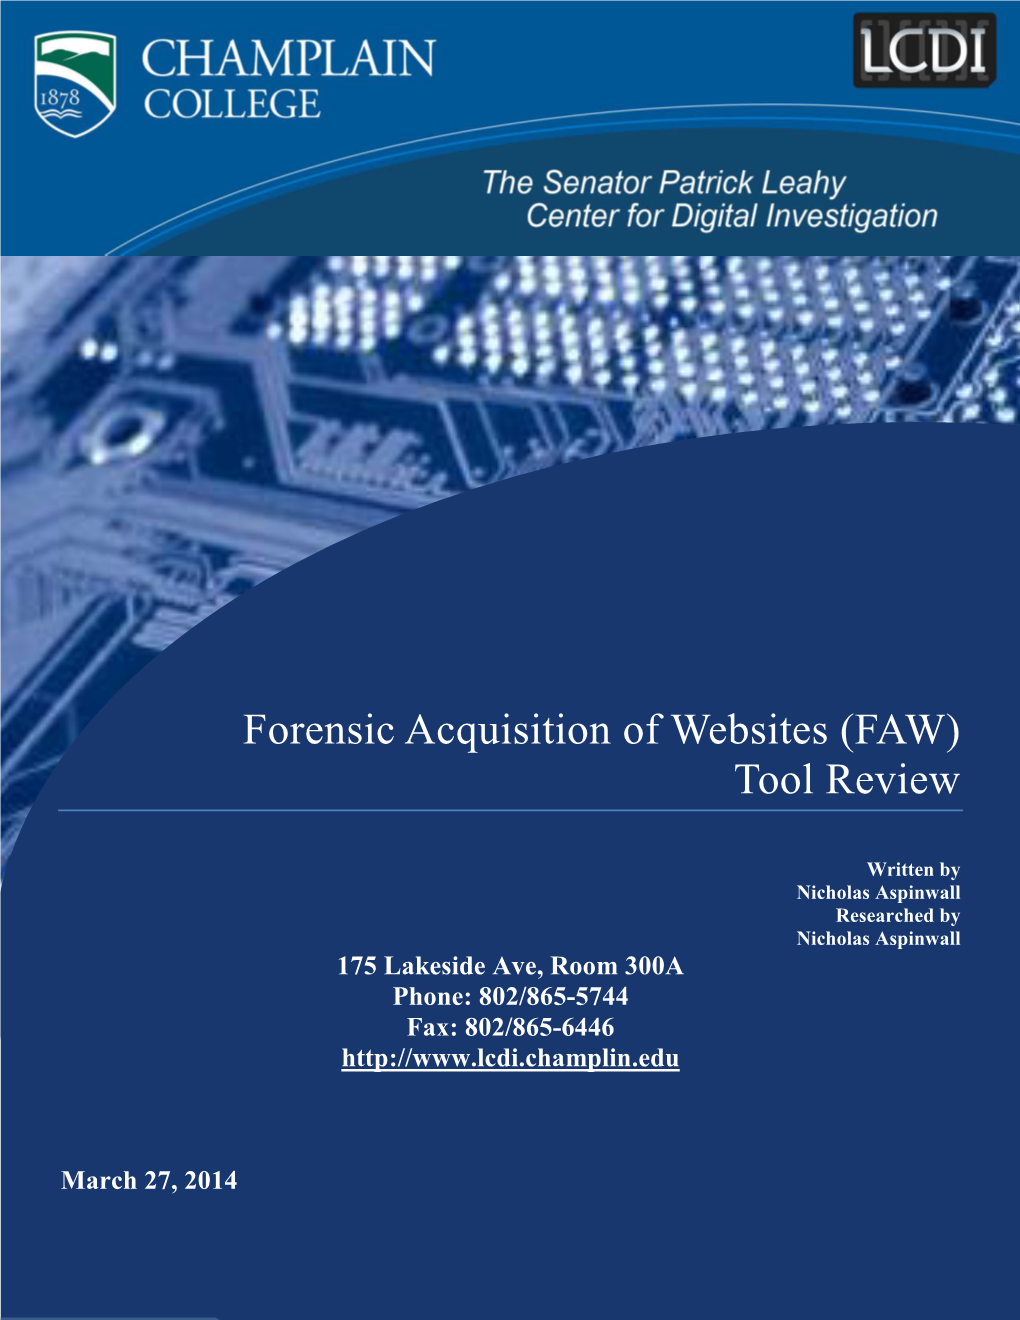 Forensic Acquisition of Websites (FAW) Tool Review